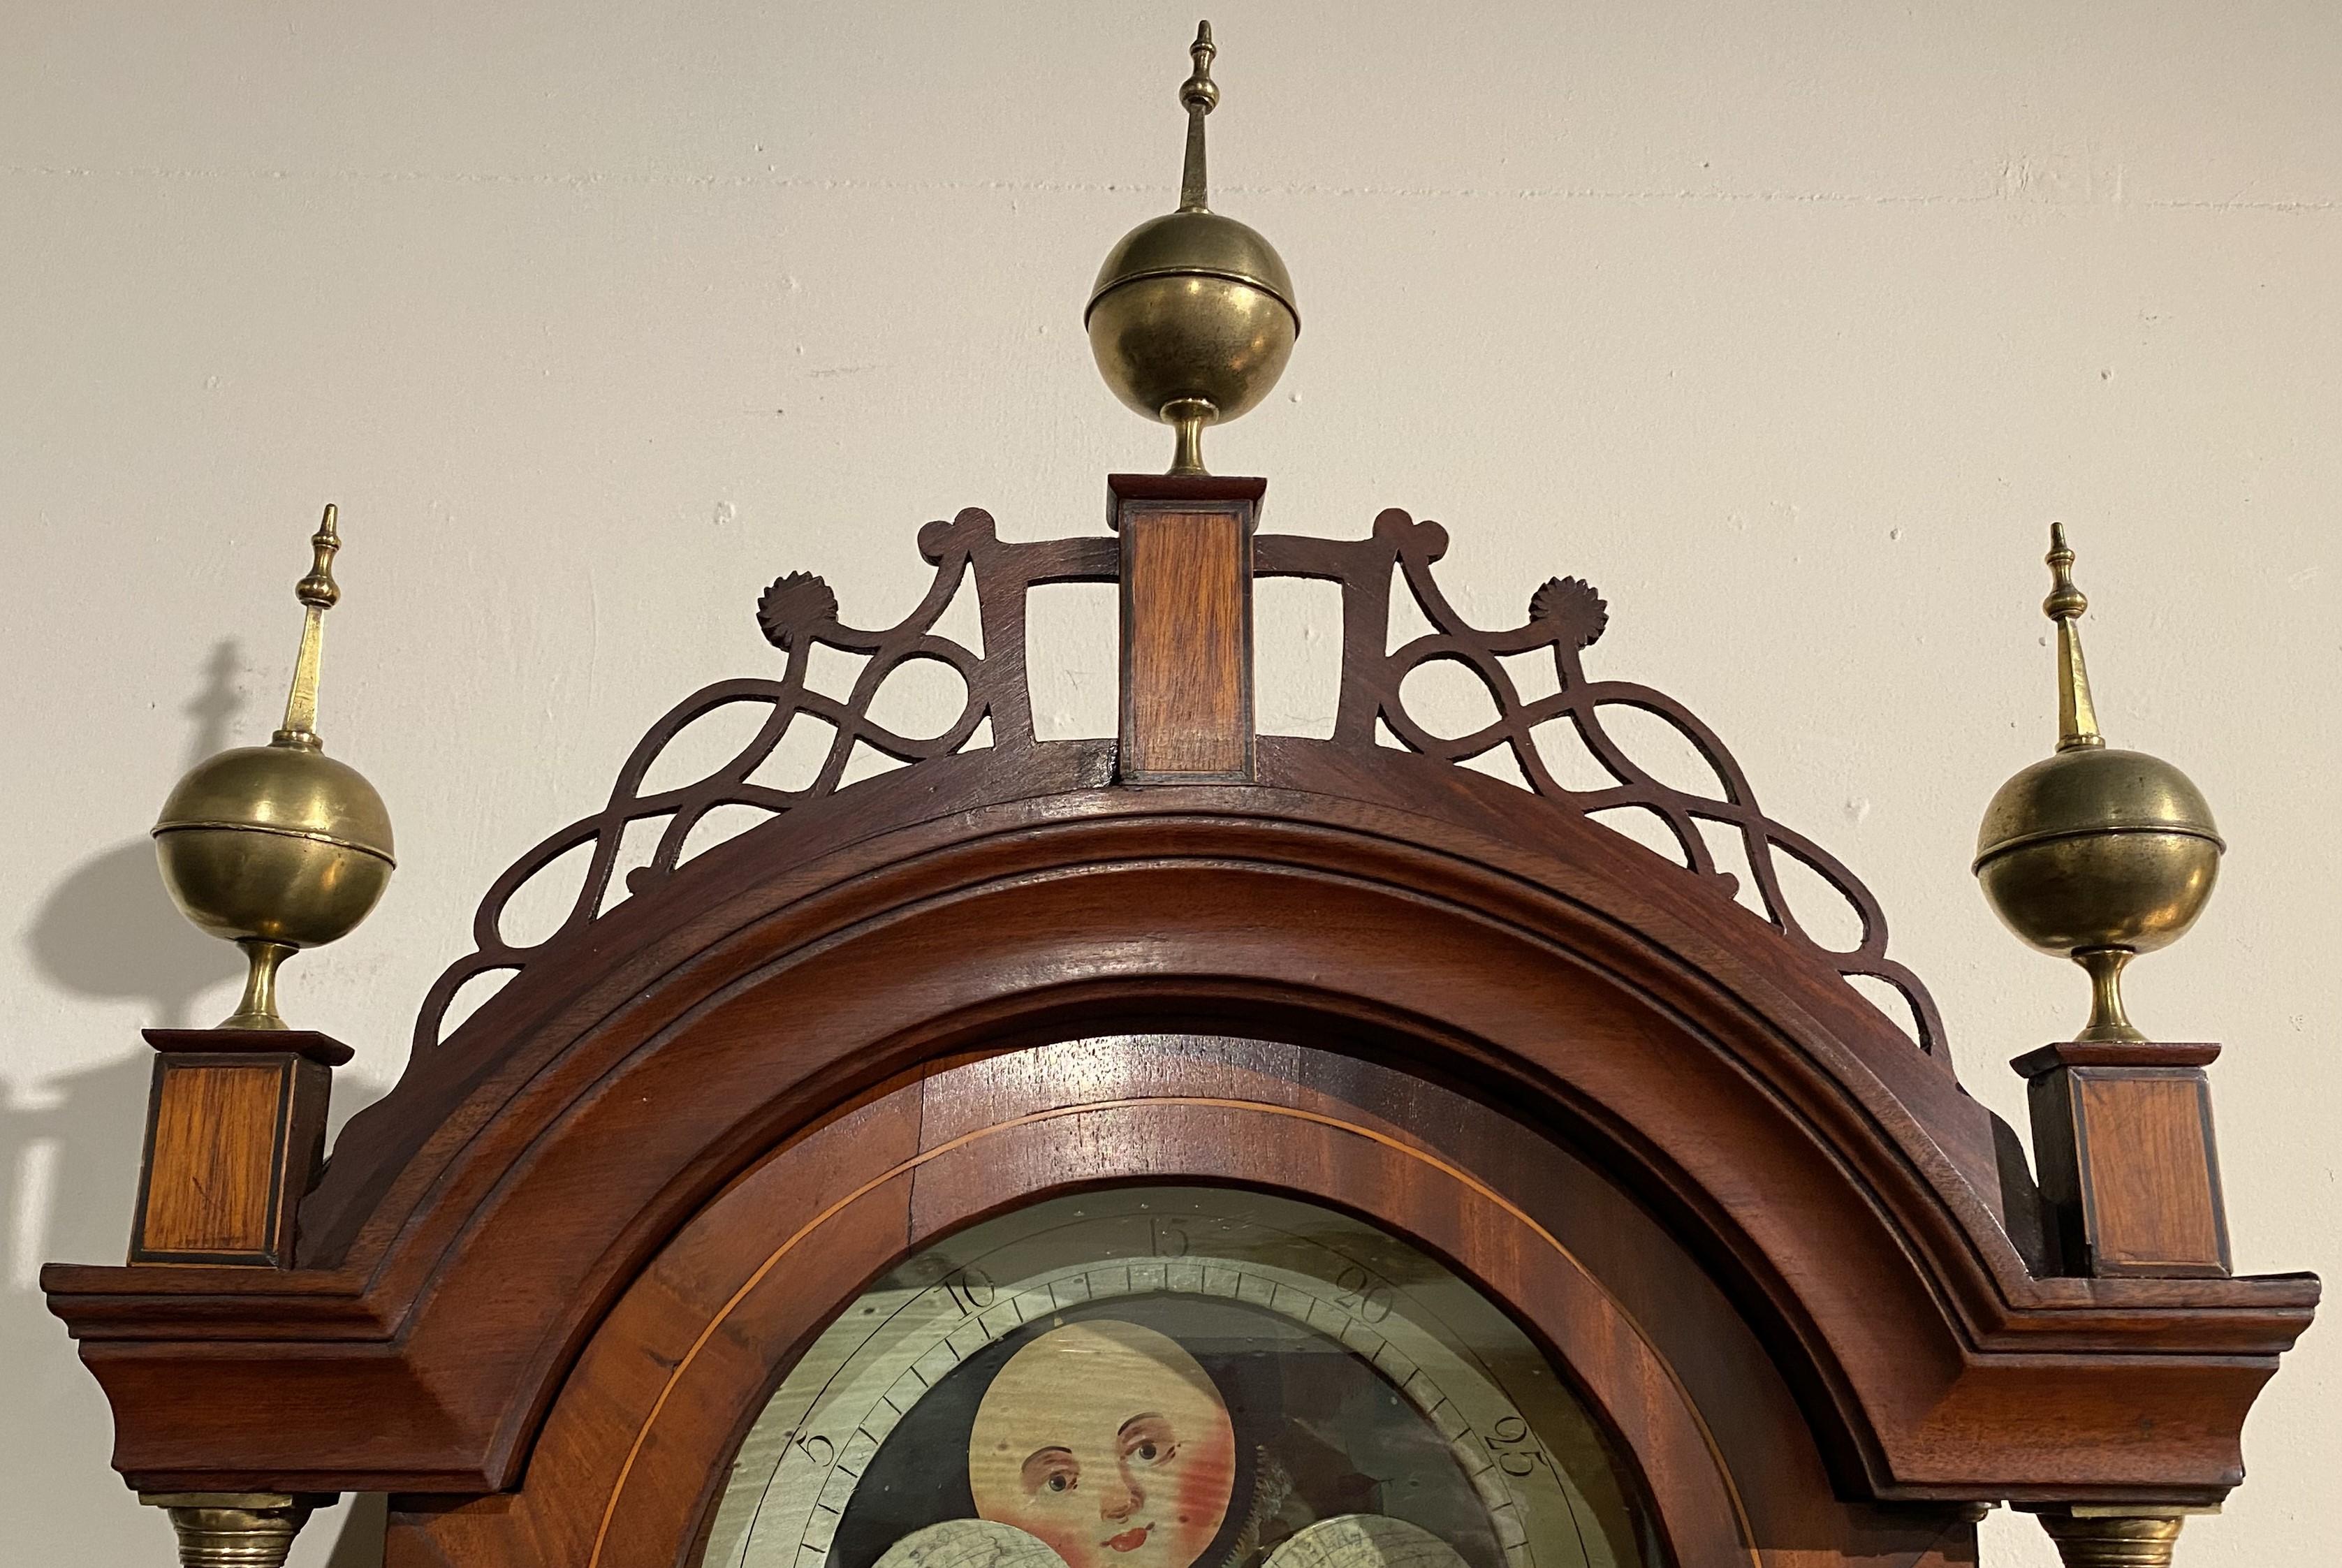 William Cummens Federal Mahogany Tall Clock with Moon Phase Dial circa 1820 In Good Condition For Sale In Milford, NH